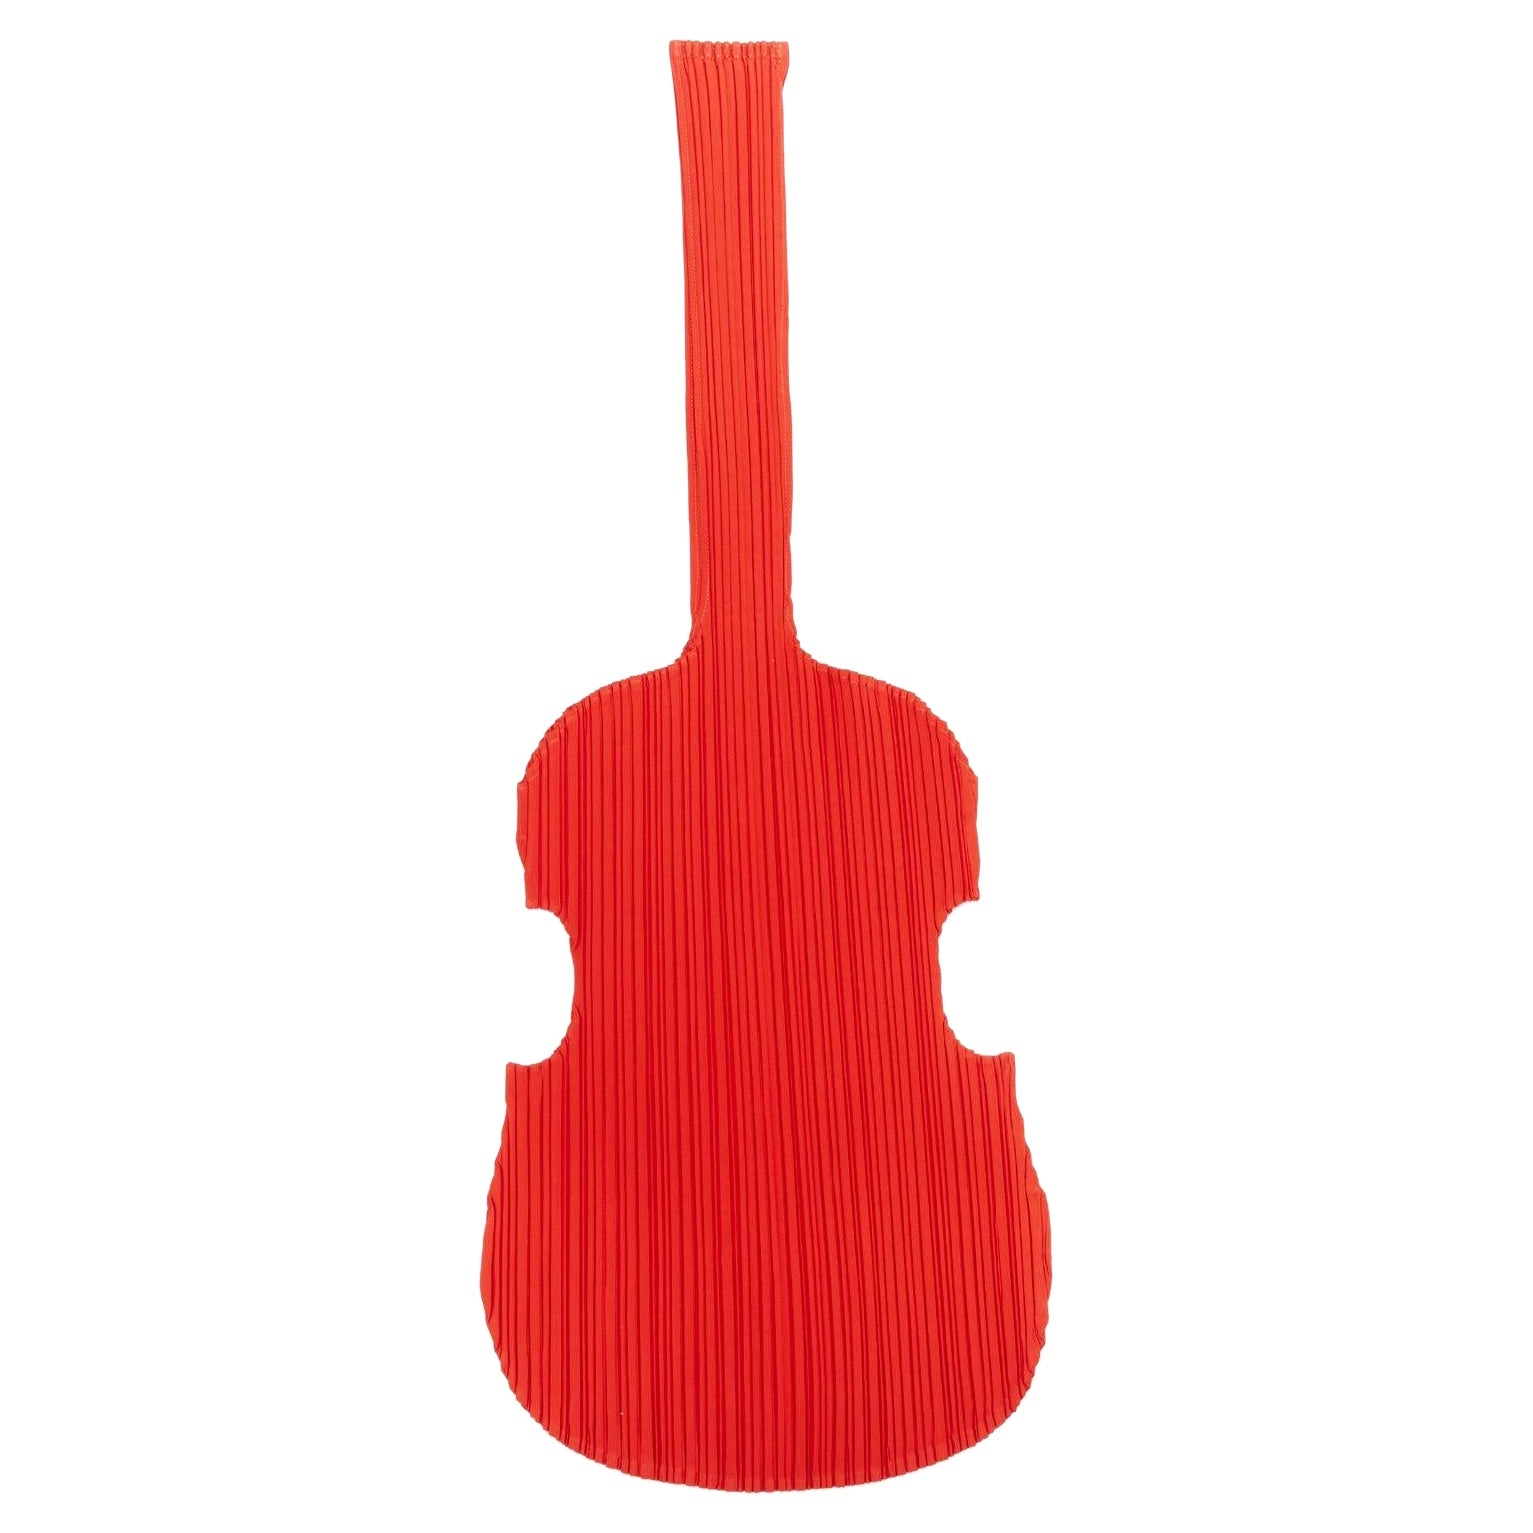 ISSEY MIYAKE PLEATS PLEASE rare limited edition red plisse guitar tote bag